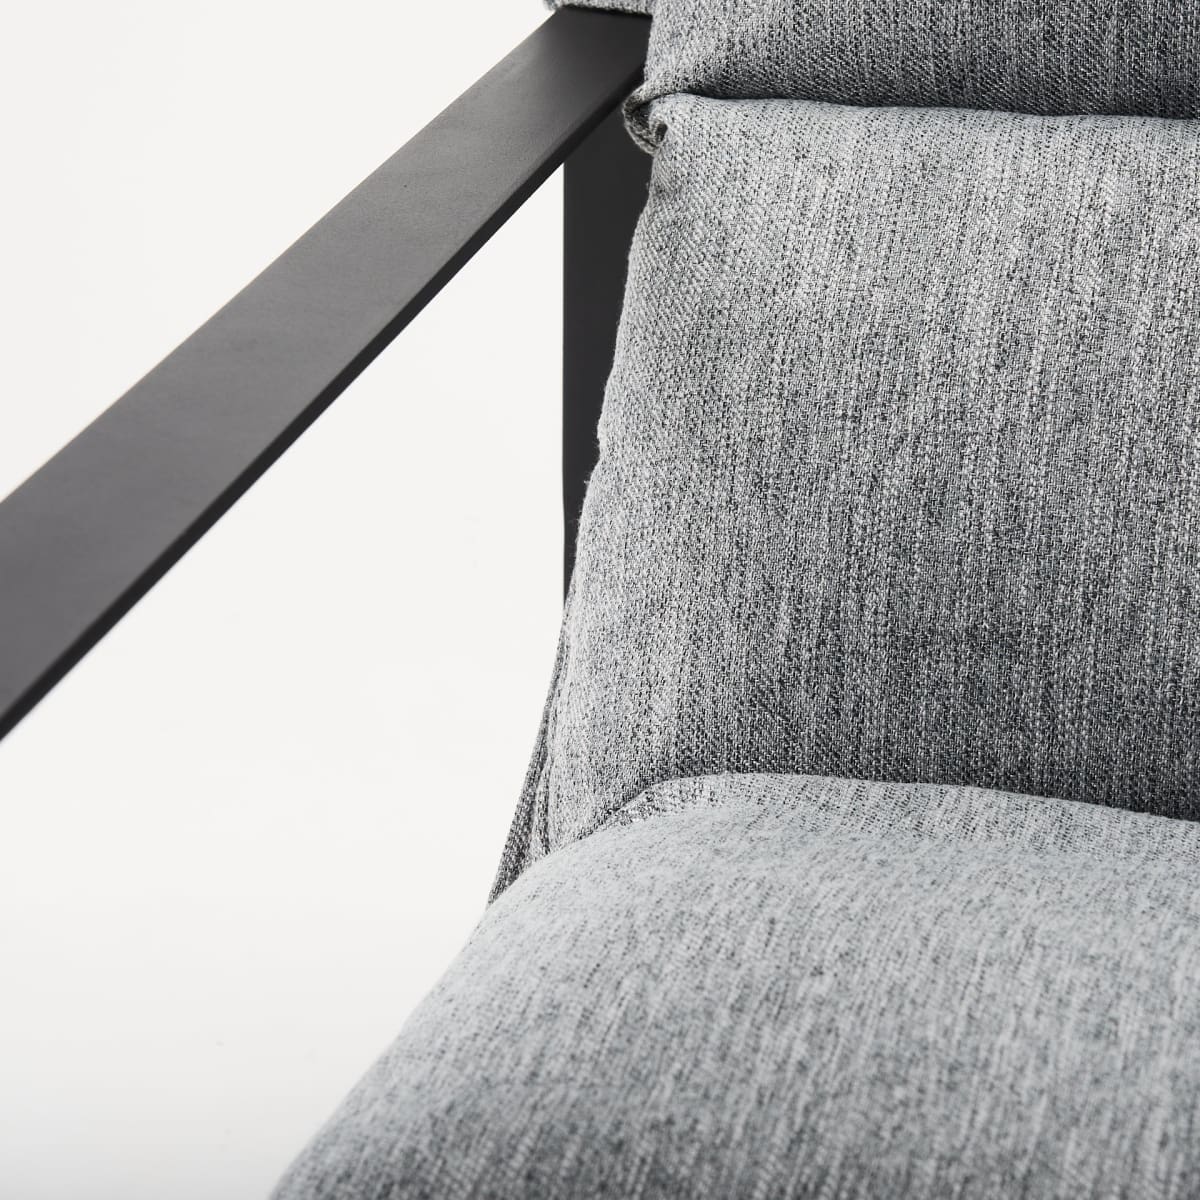 Guilia Accent Chair Castlerock Gray Fabric | Black Metal - accent-chairs